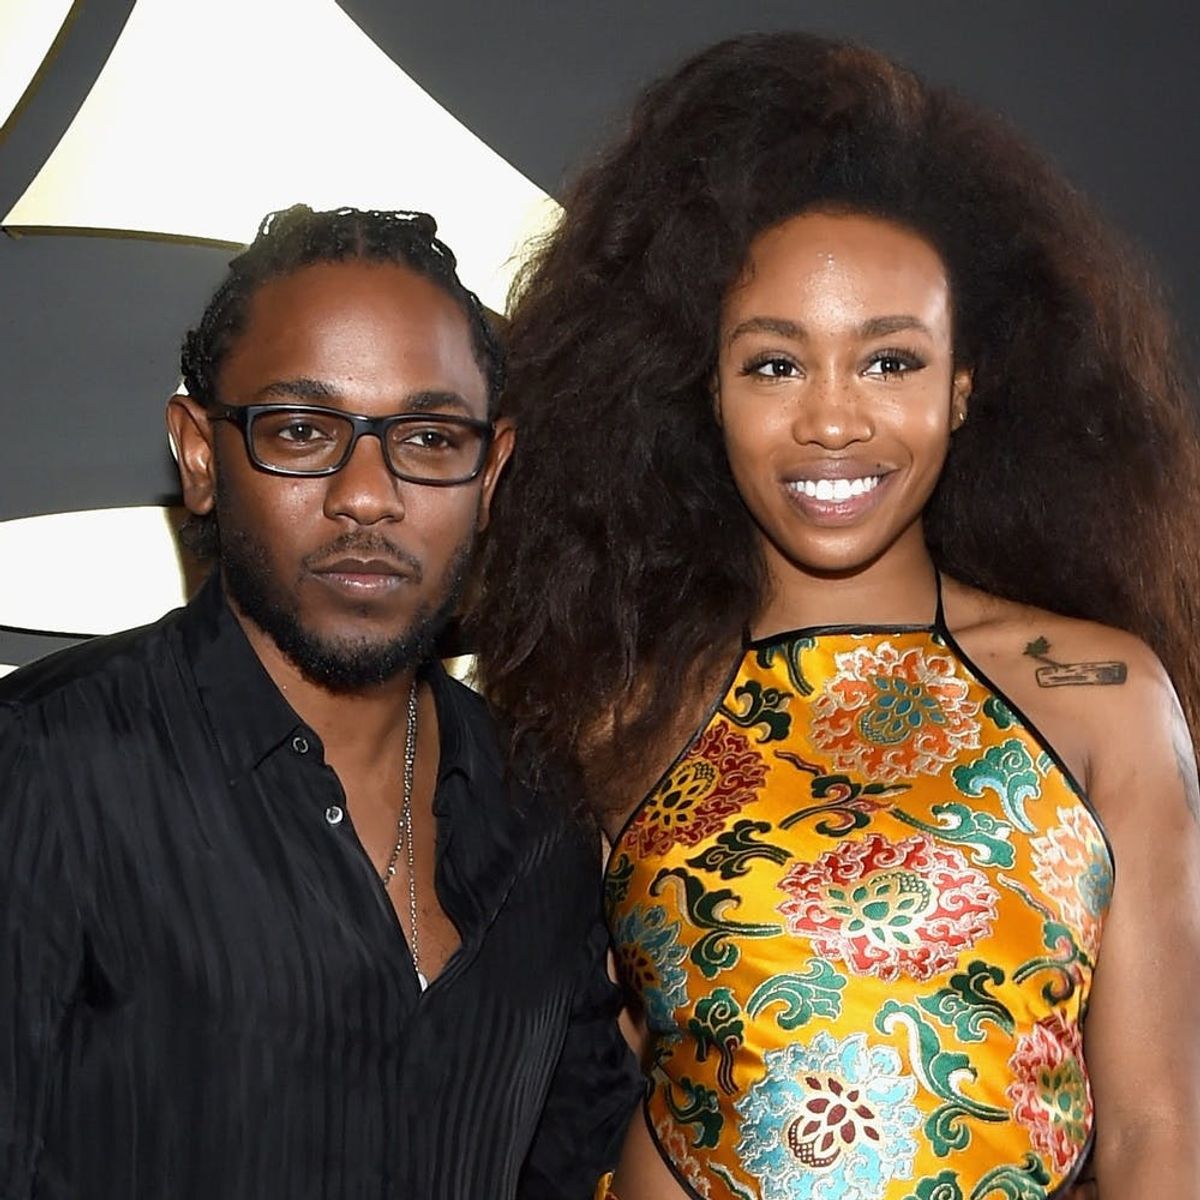 See Why Everyone Is Talking About Kendrick Lamar and SZA’s ‘Black Panther’ Music Video for ‘All the Stars’